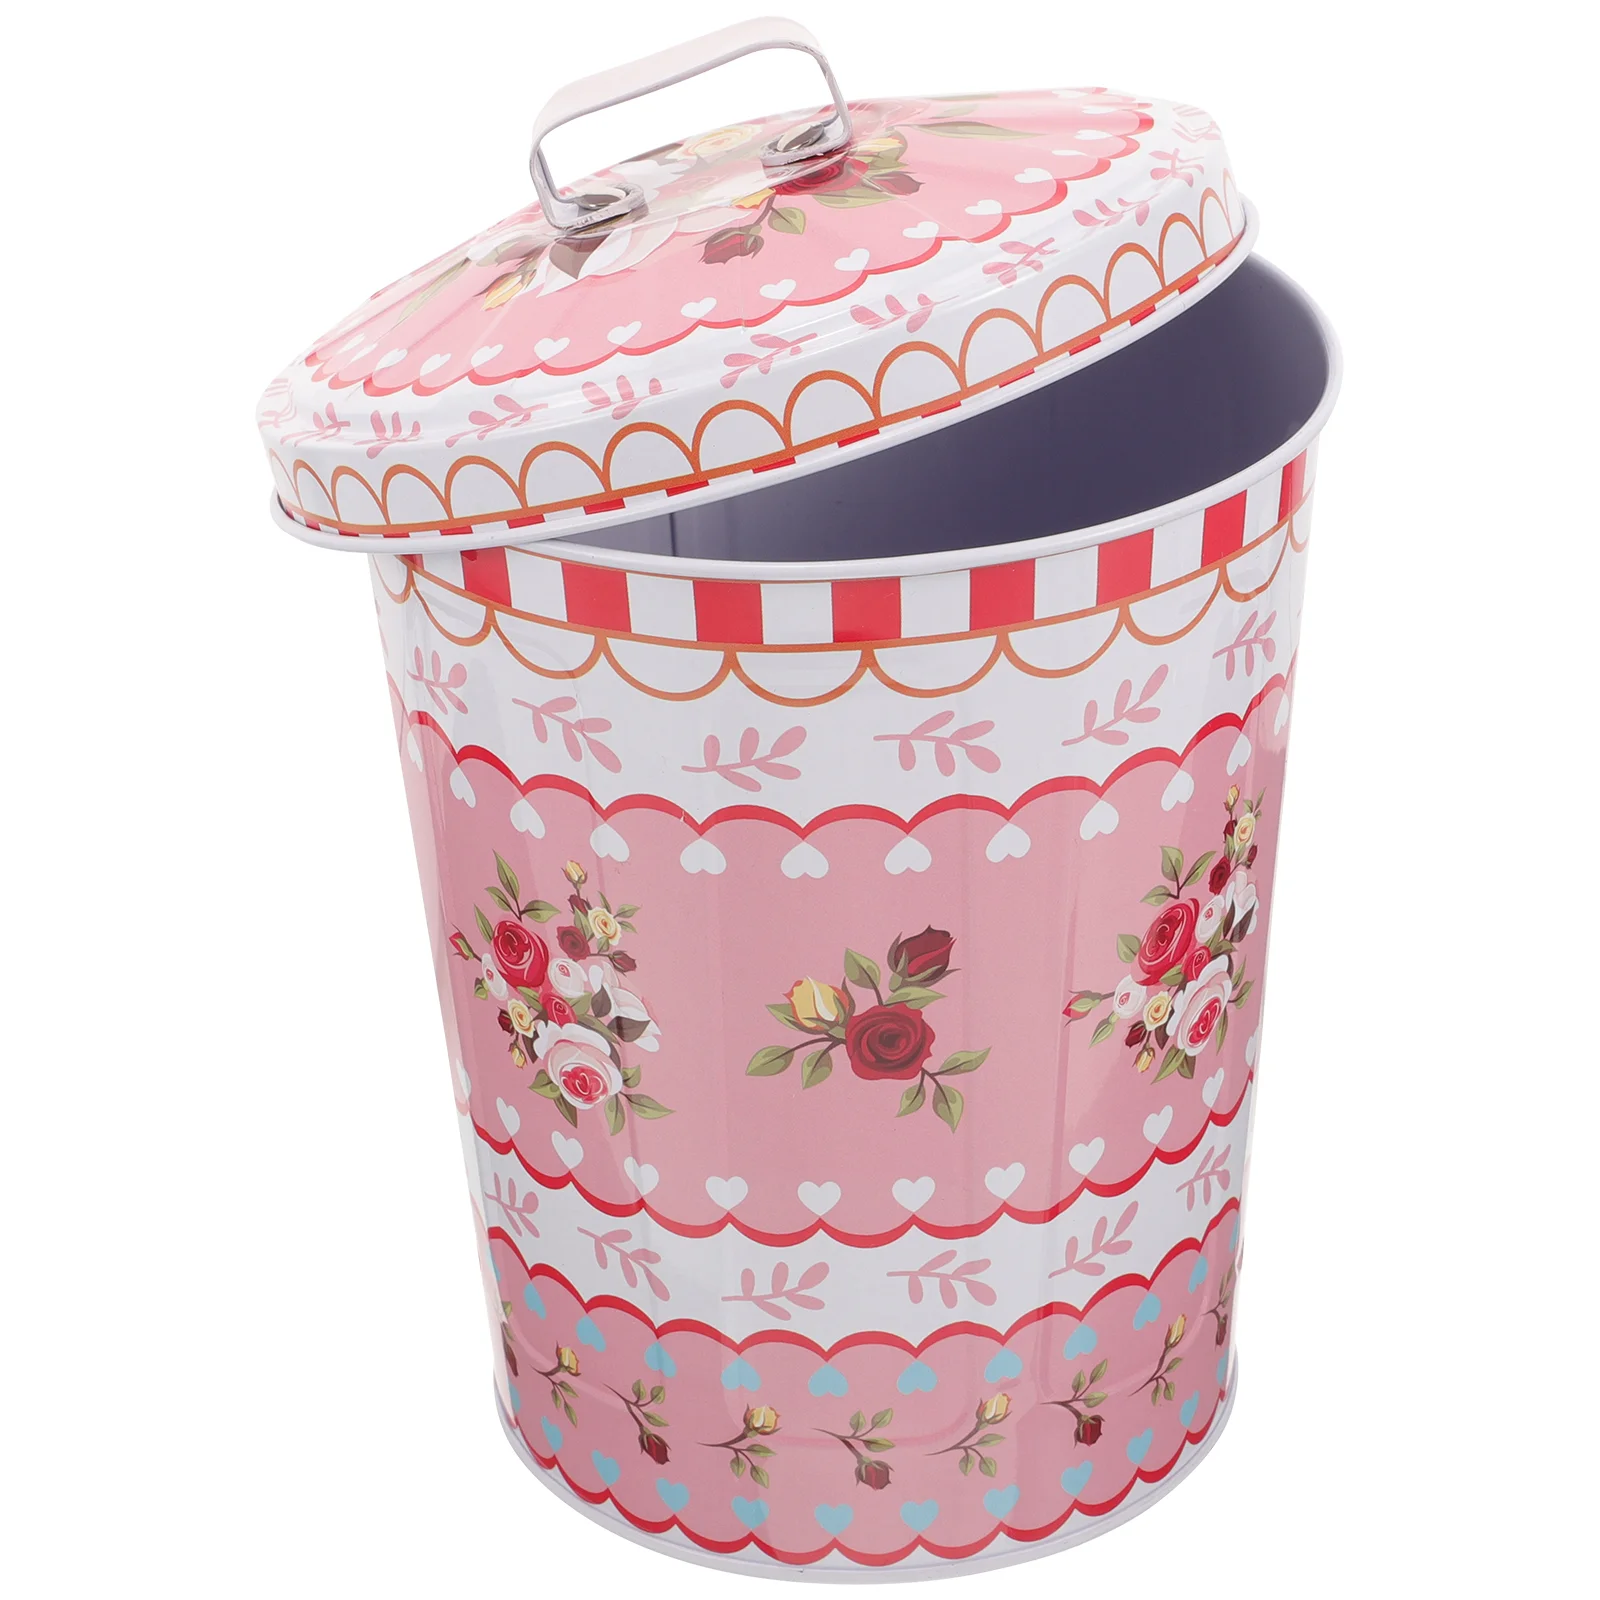 

Trash Container Can Cartoon Desktop Storage Box Office Mini Garbage Bin Wrought Iron Cans